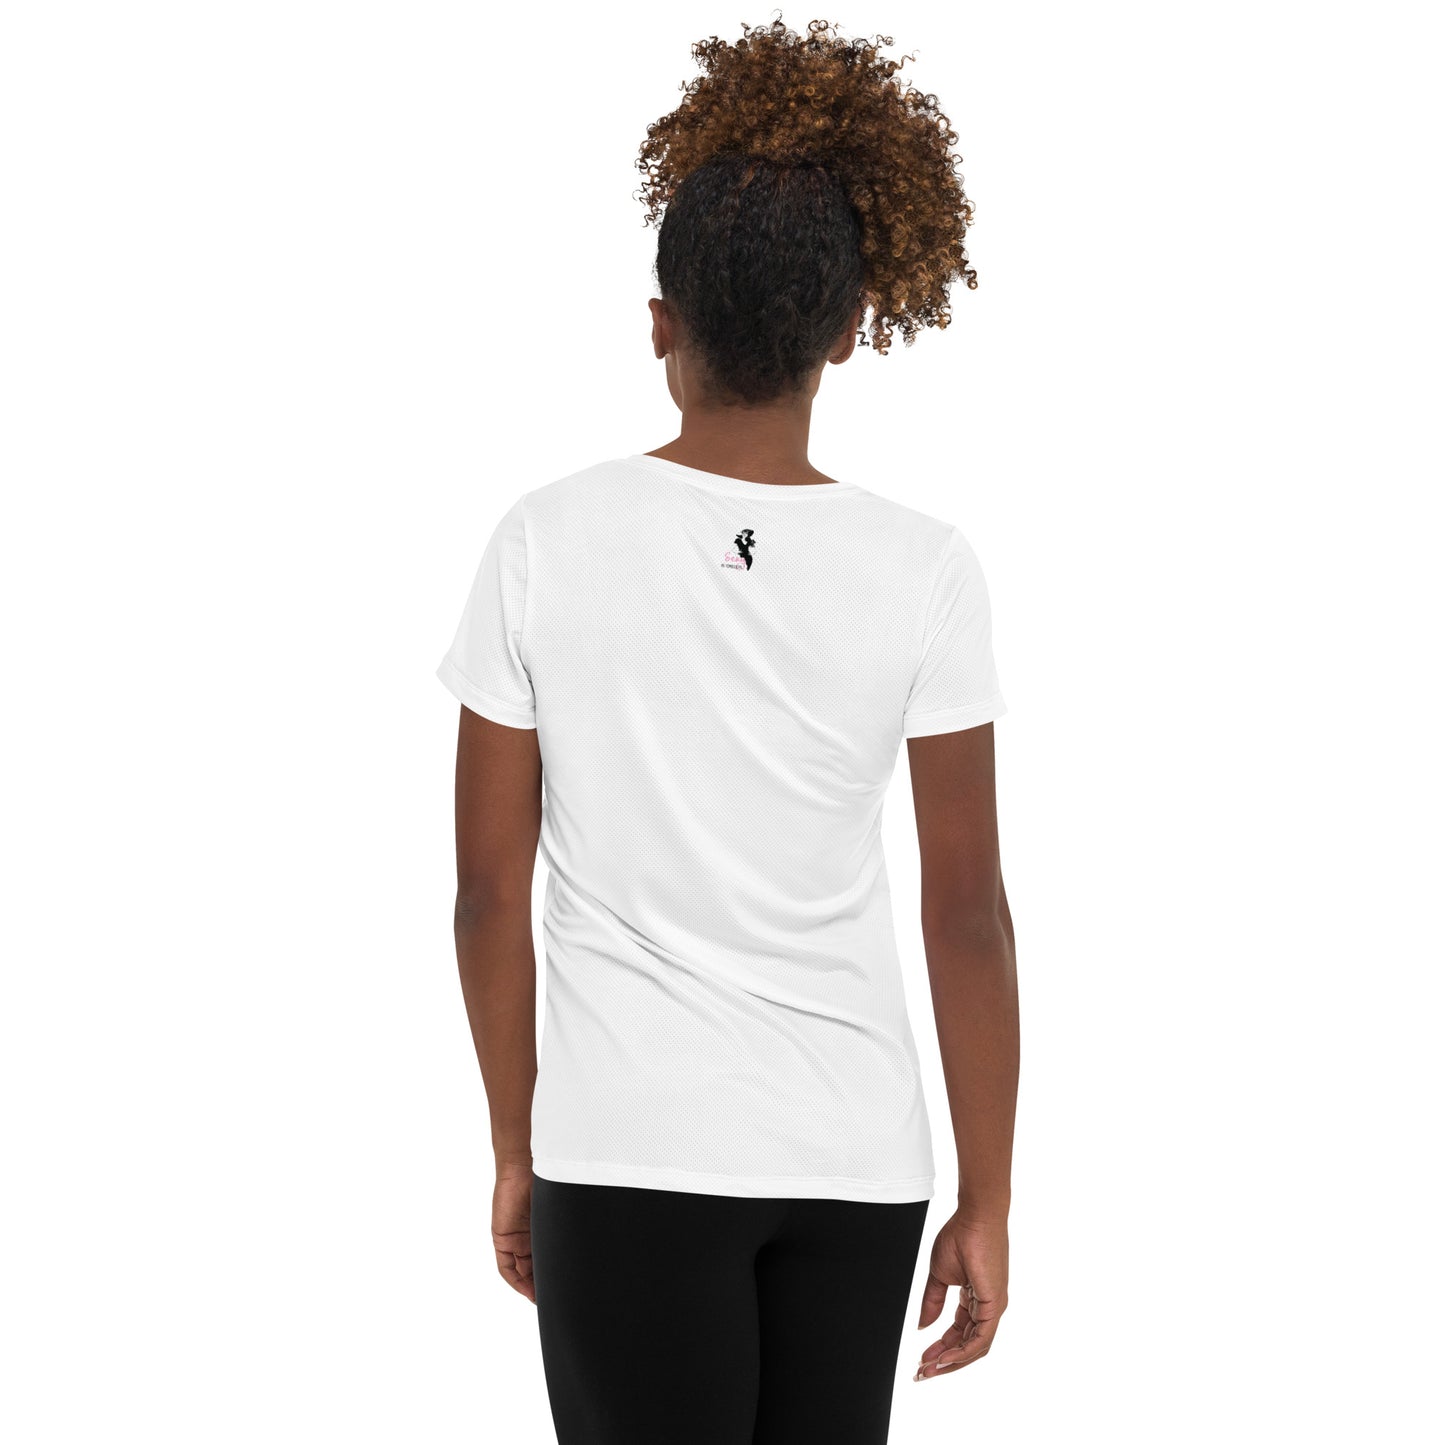 YOU ARE BEAUTIFUL - Women's Athletic T-shirt